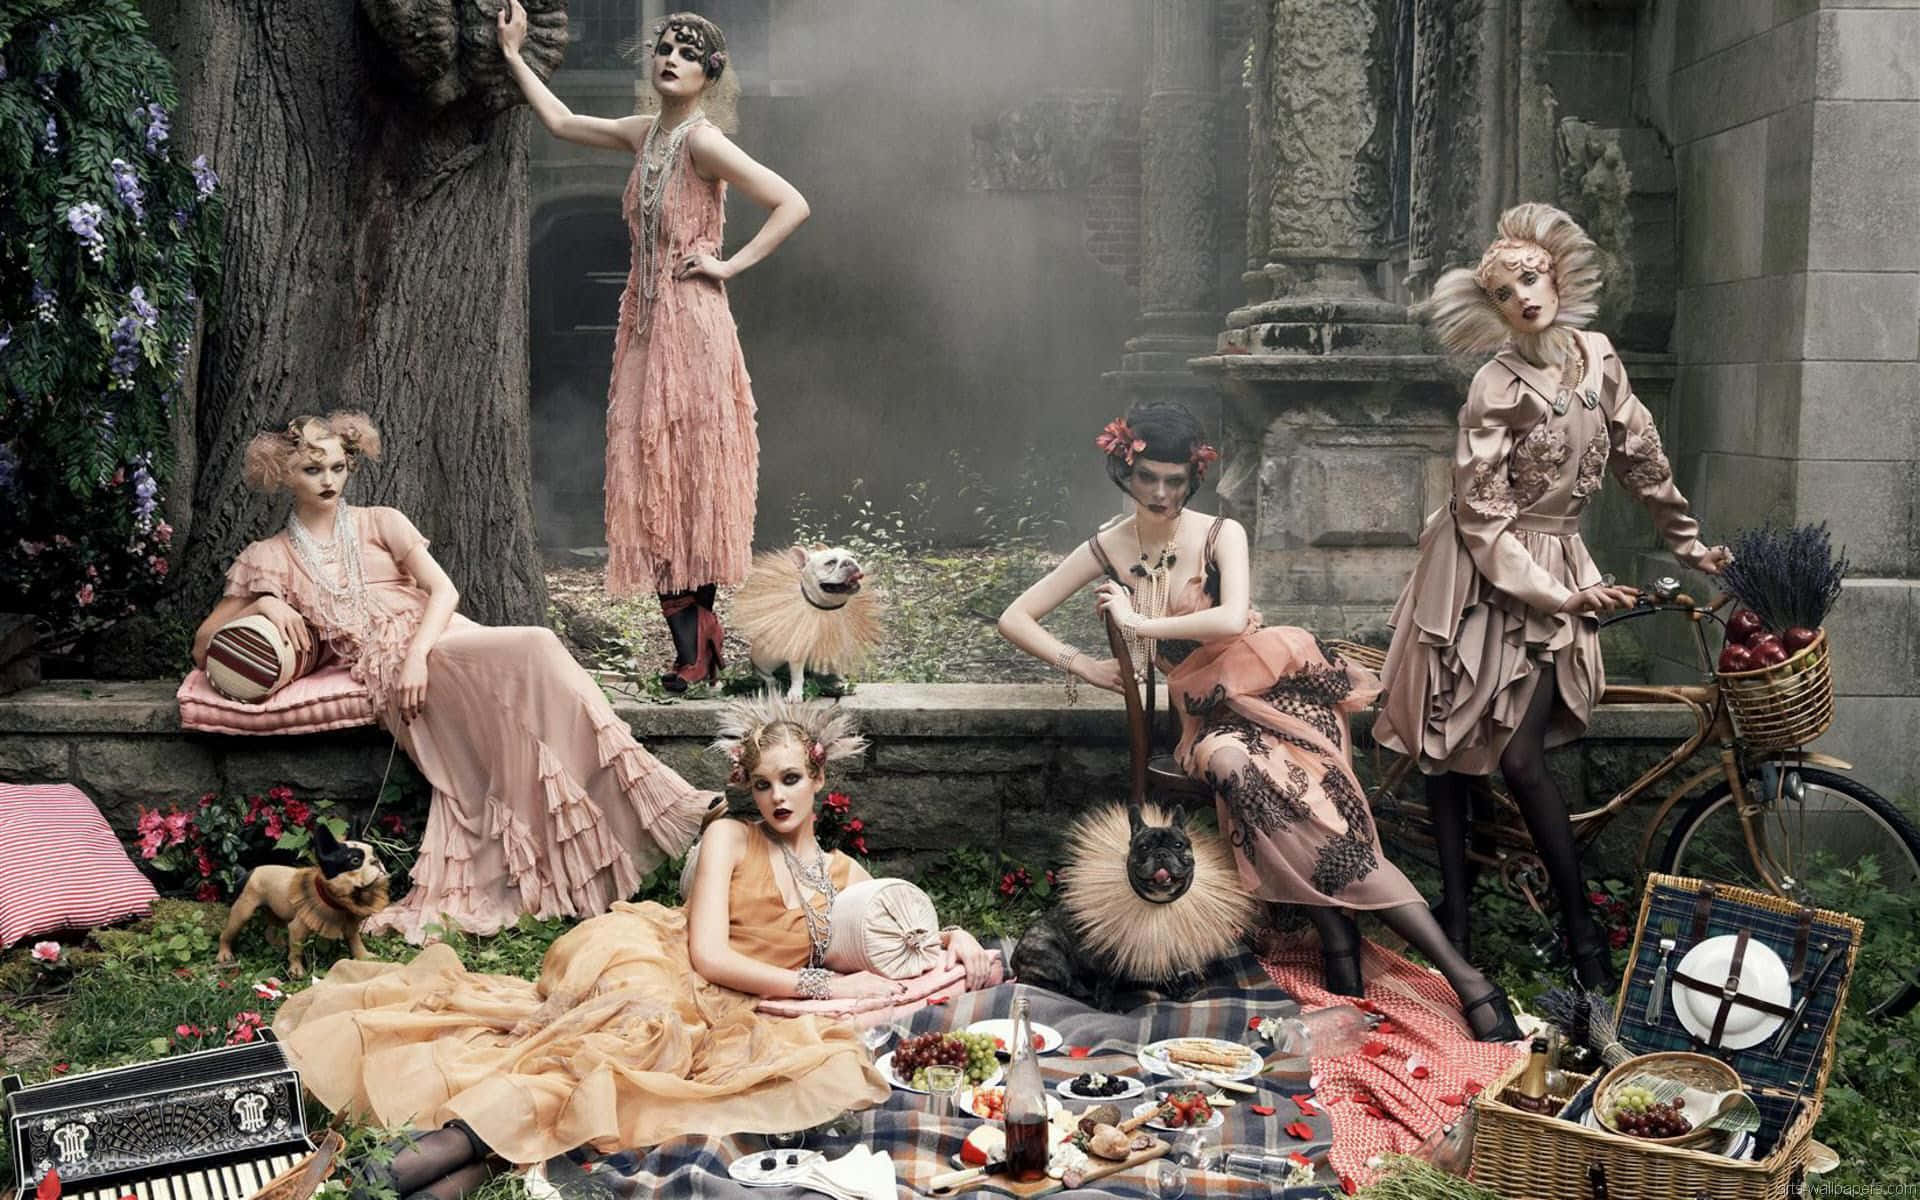 Timwalker Vogue Us Für Mädchen (as A Caption For A Computer Or Mobile Wallpaper Featuring An Image From The Tim Walker Photoshoot For Vogue Us That Is Aimed Towards Young Girls Or Features A Girly Aesthetic). Wallpaper